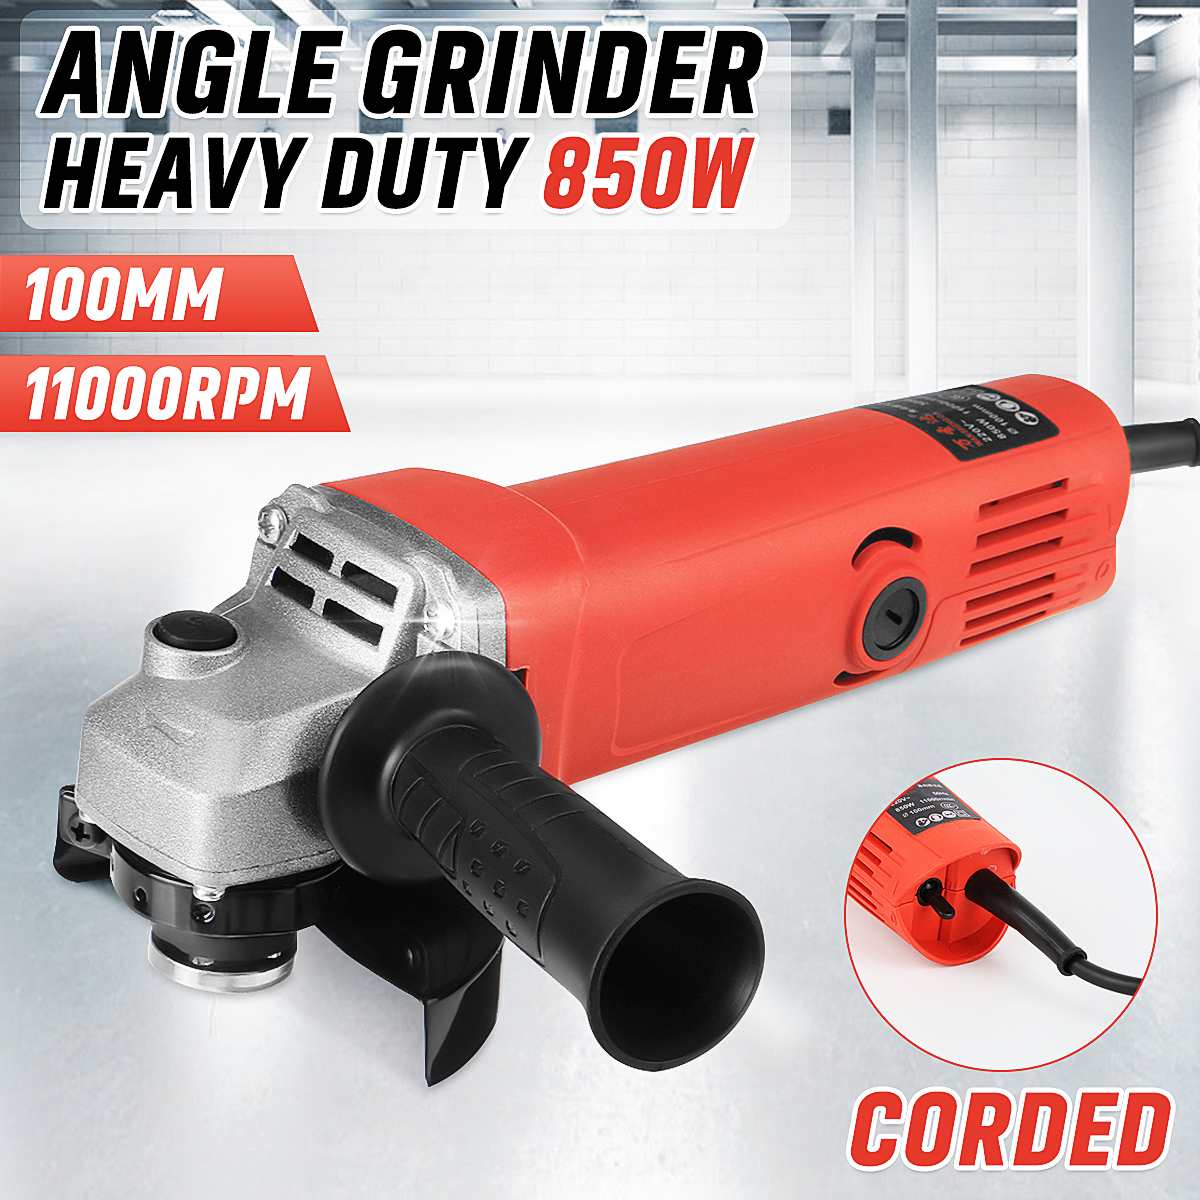 850W-100mm-11000rpm-Electric-Angle-Grinder-Cutting-Machine-Handheld-Polishing-Grinding-Carving-Tool-1736781-1